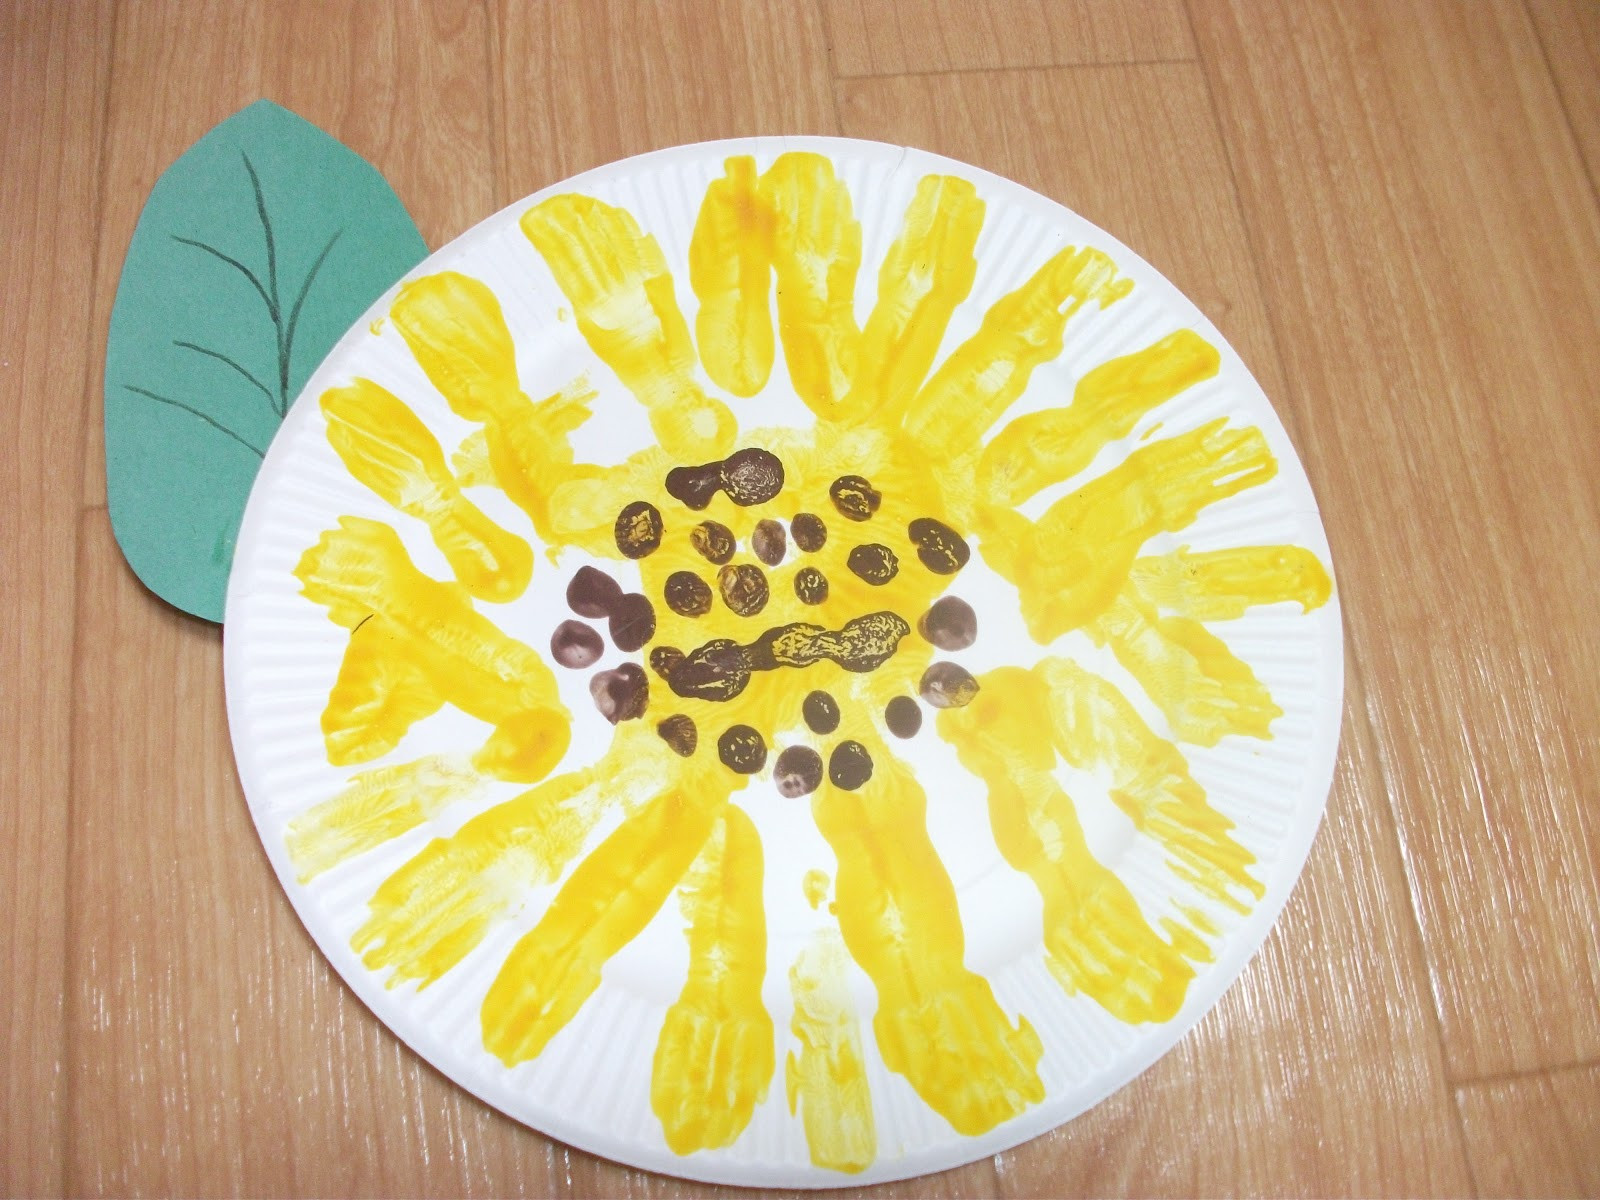 Easy Crafts For Preschoolers
 Preschool Crafts for Kids Easy Paper Plate Sunflower Craft